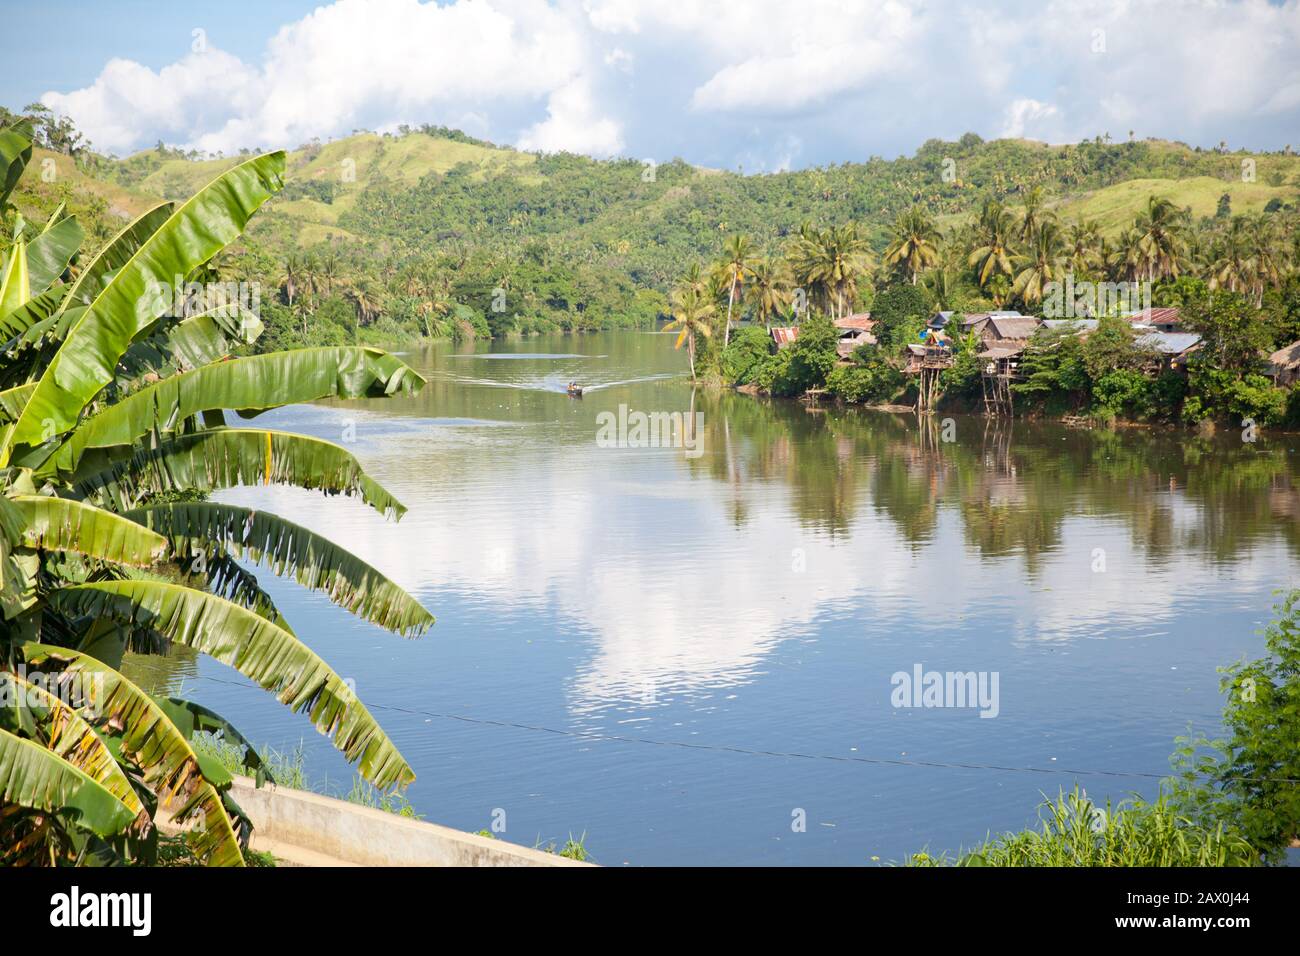 River and green hills. Beautiful natural scenery of river in southeast Asia. Countryside on a large tropical island. Small village on the green hills by the river. The nature of the Philippines. Stock Photo